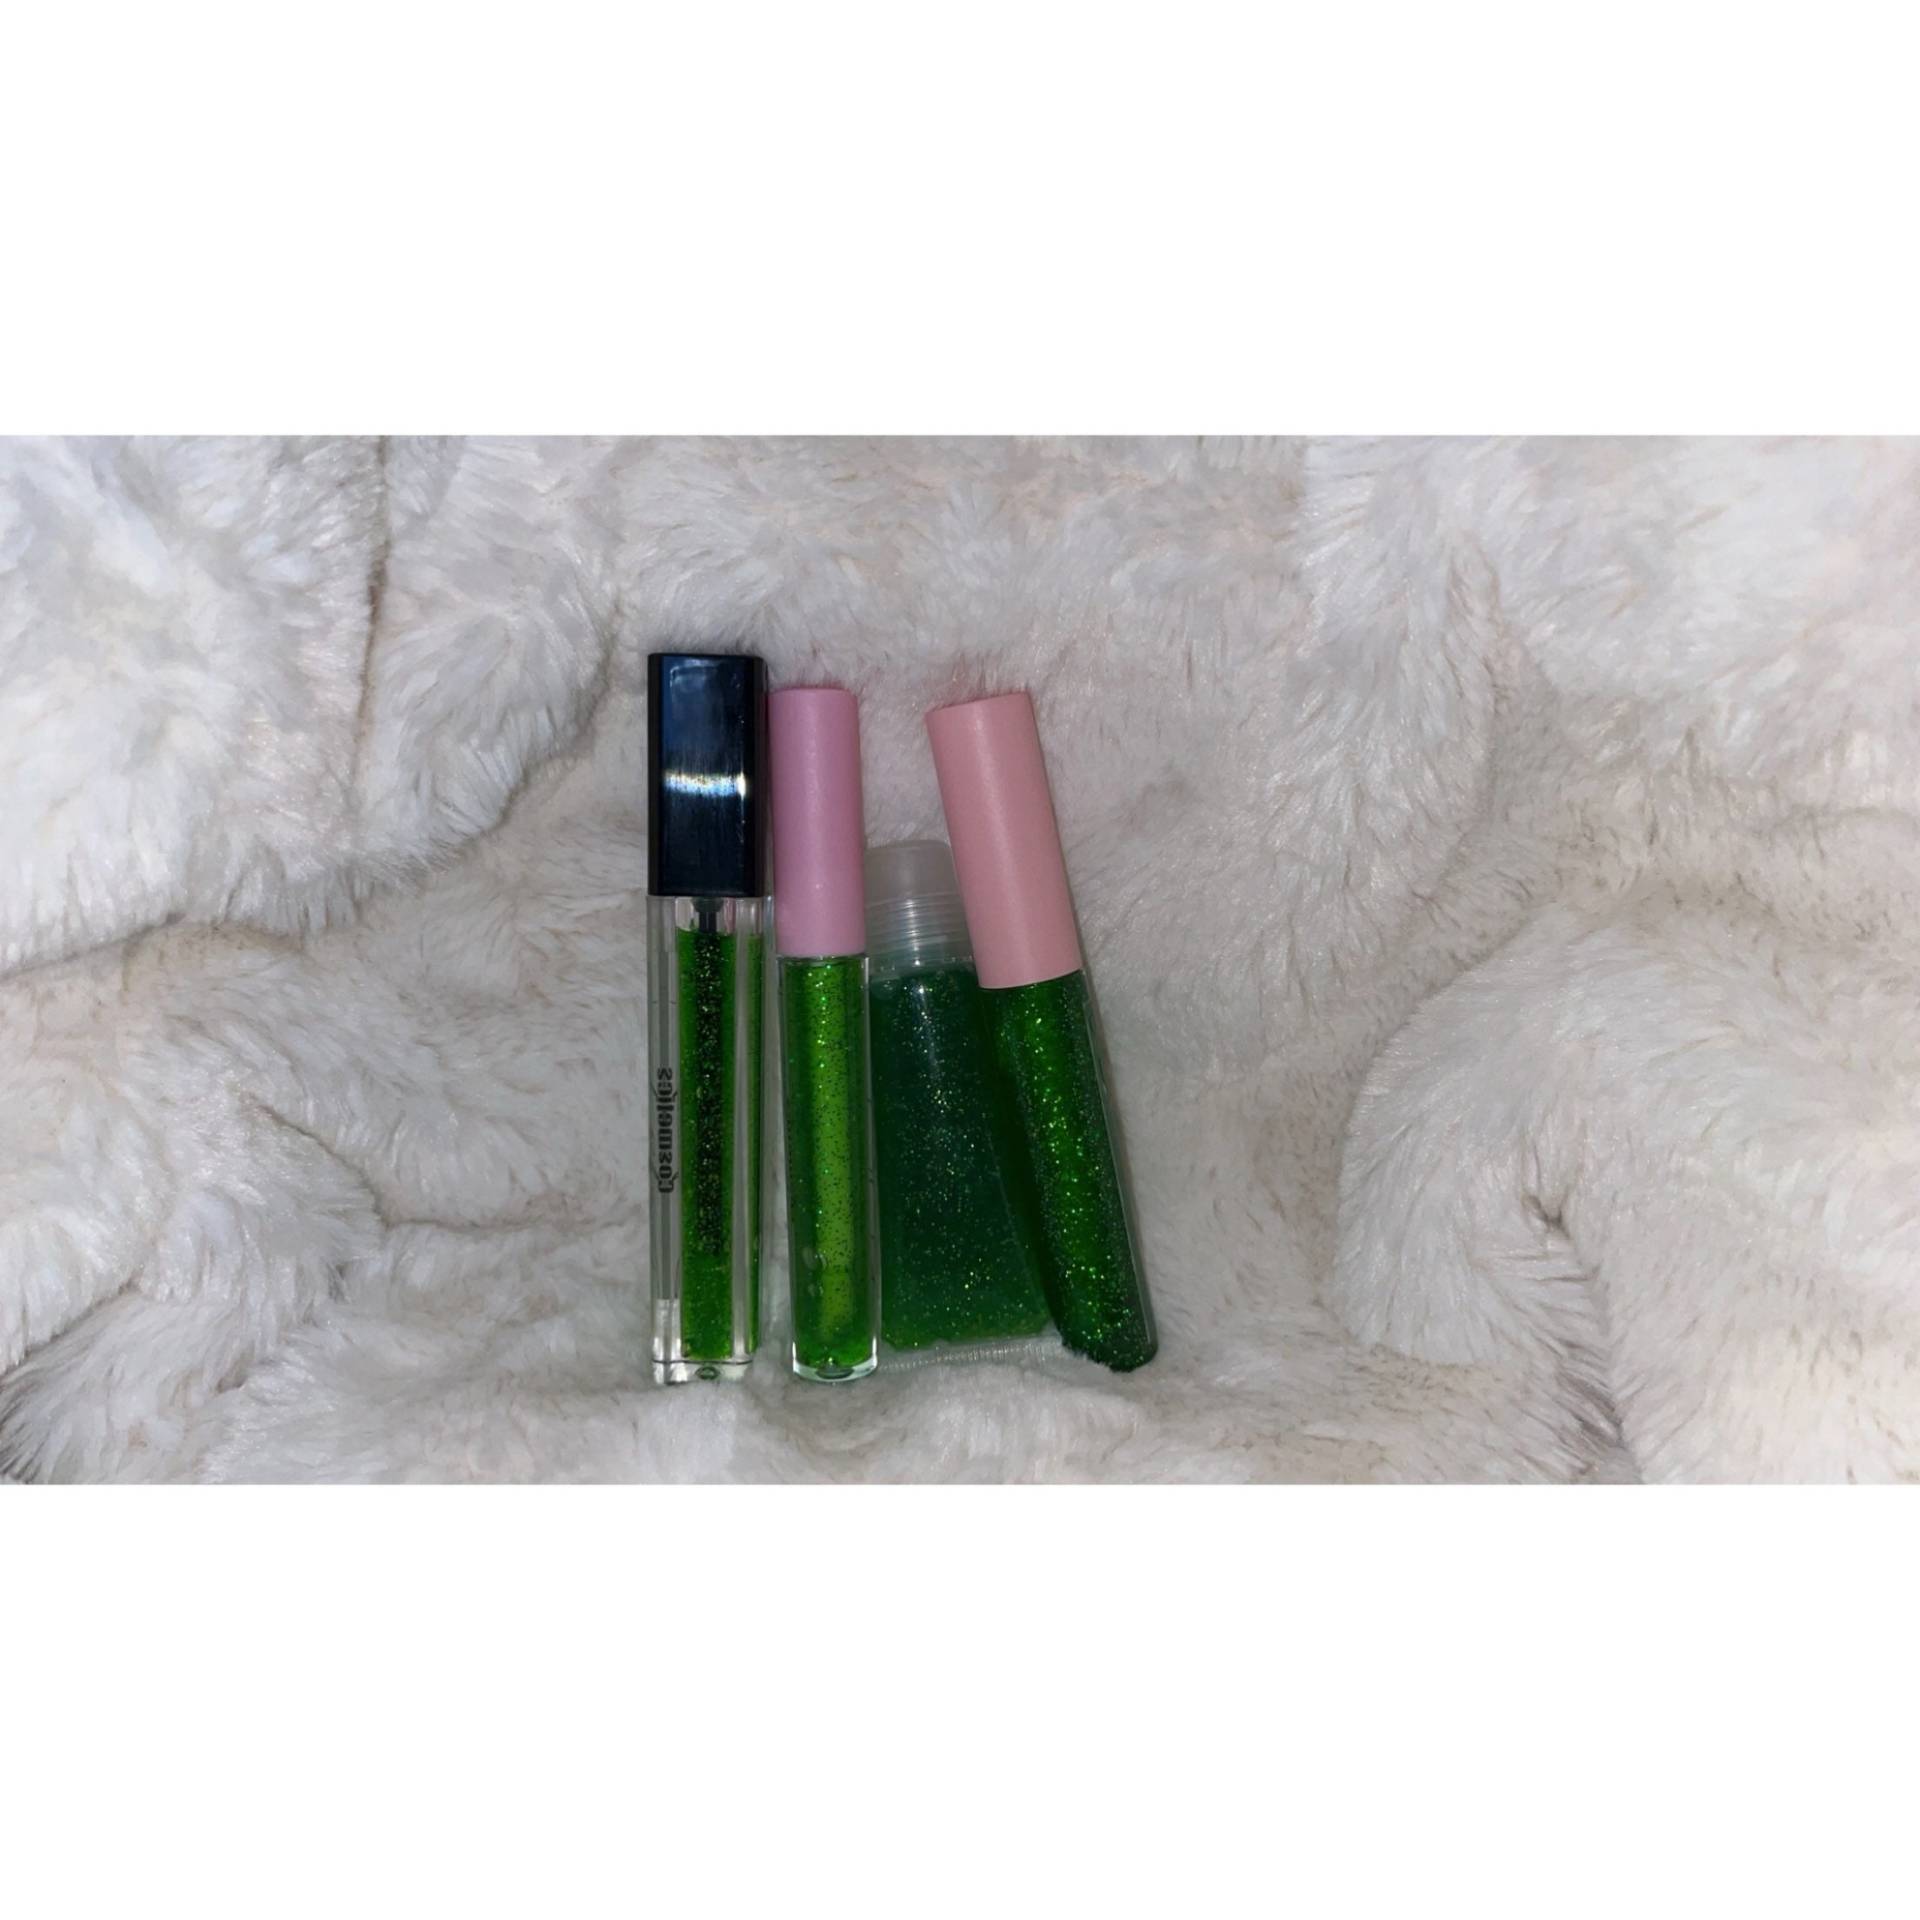 Smaragde Lipgloss von BlessThyFaceCosmetic